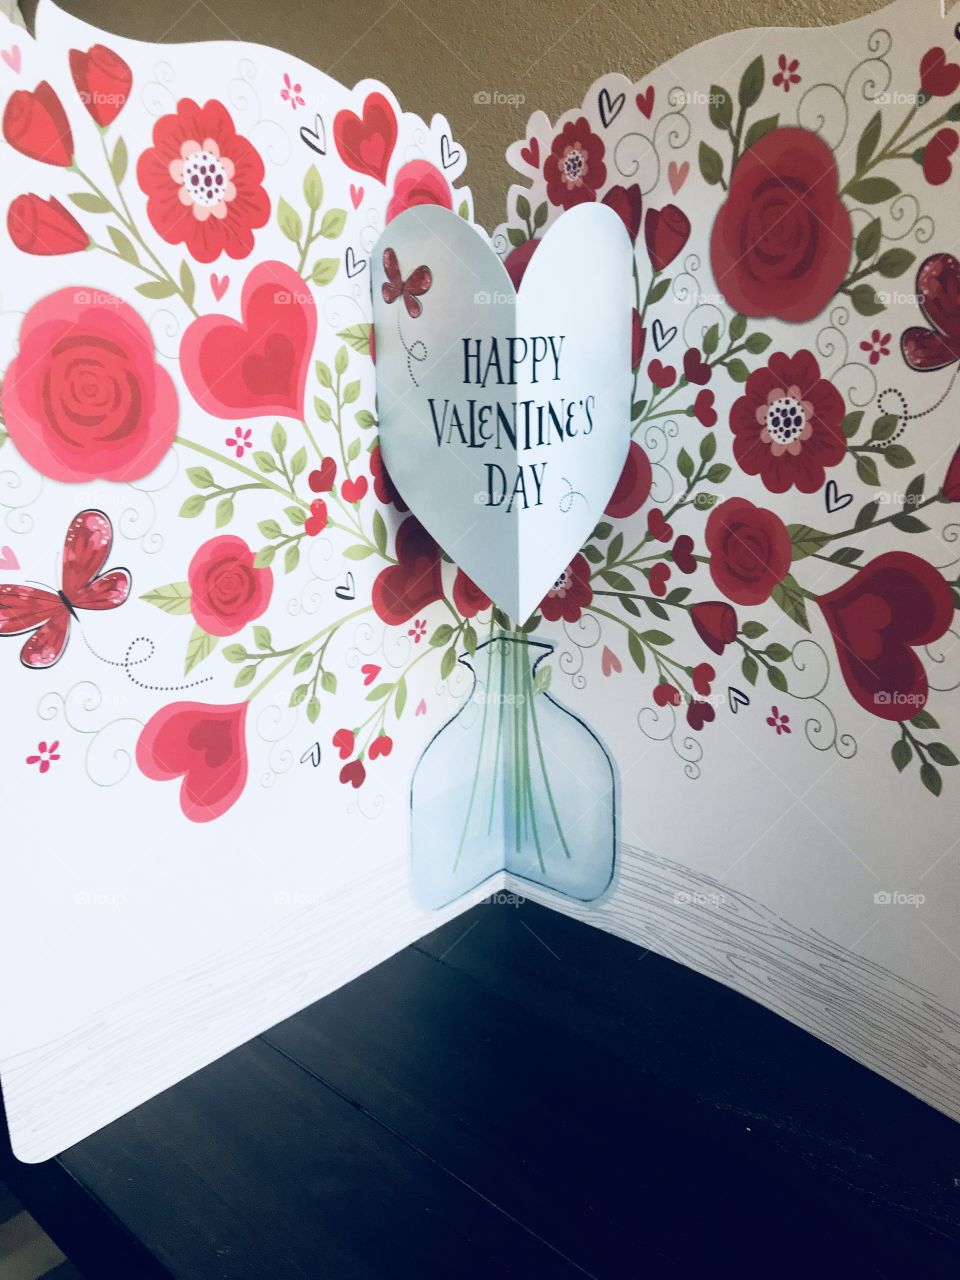 A happy Valentine’s Day card with hearts, flowers and roses  celebrating Valentine’s Day for your sweetheart. USA, America 